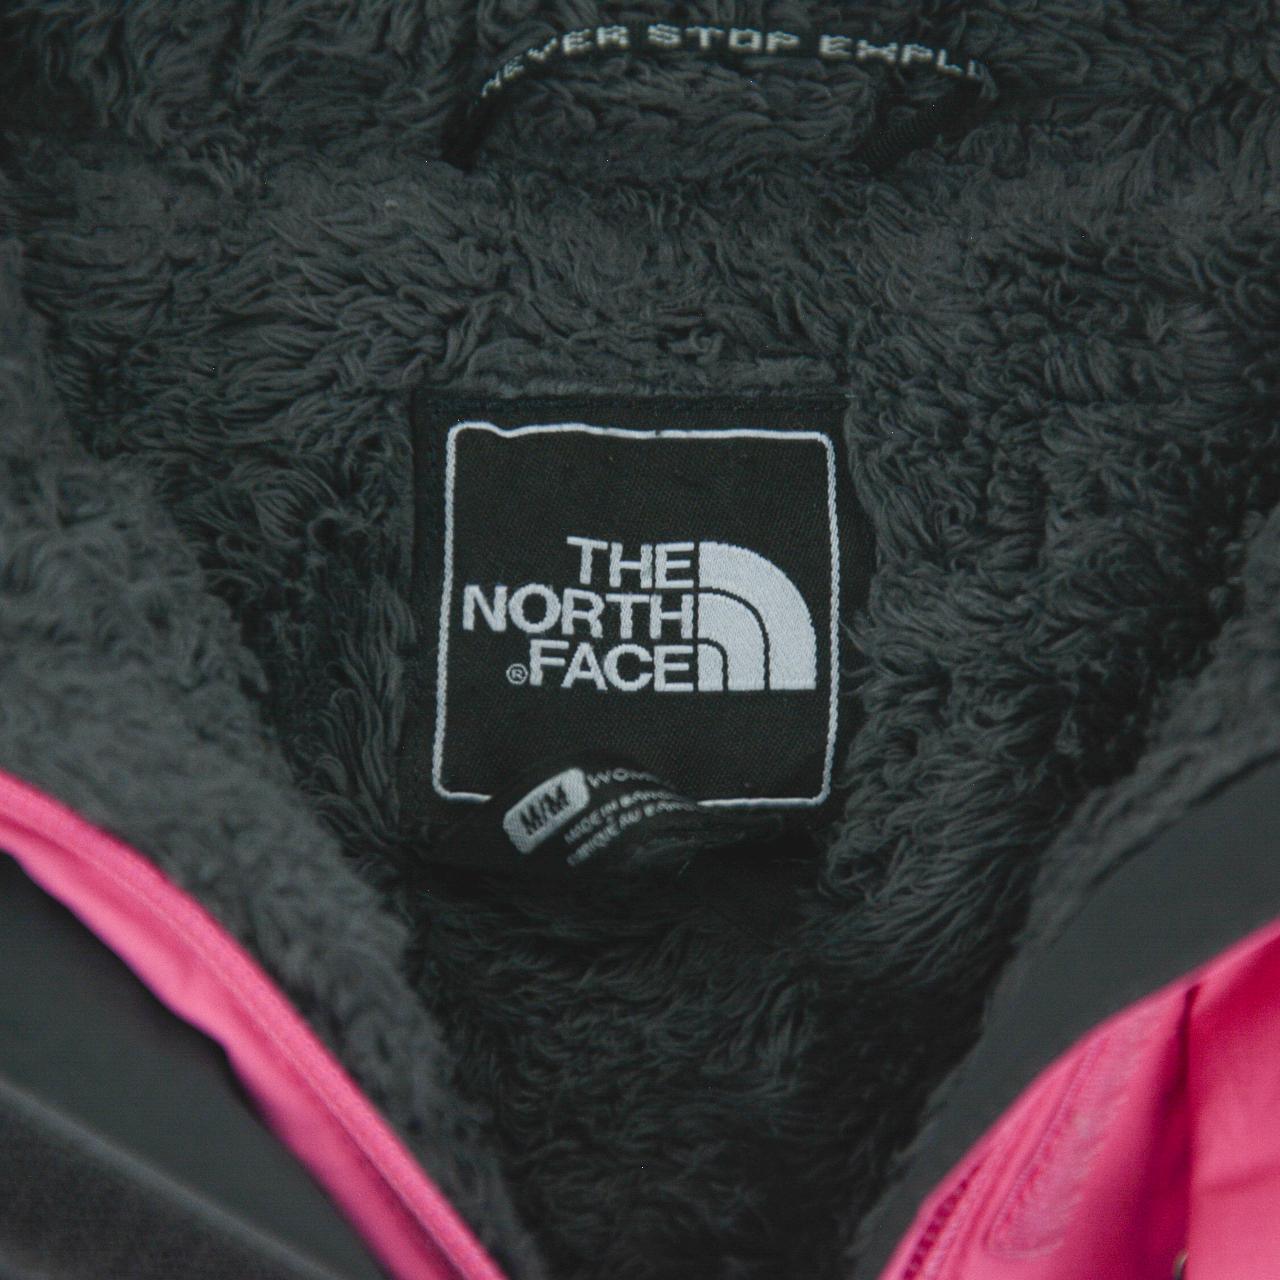 Vintage The North Face Jacket Women's Size M - Known Source